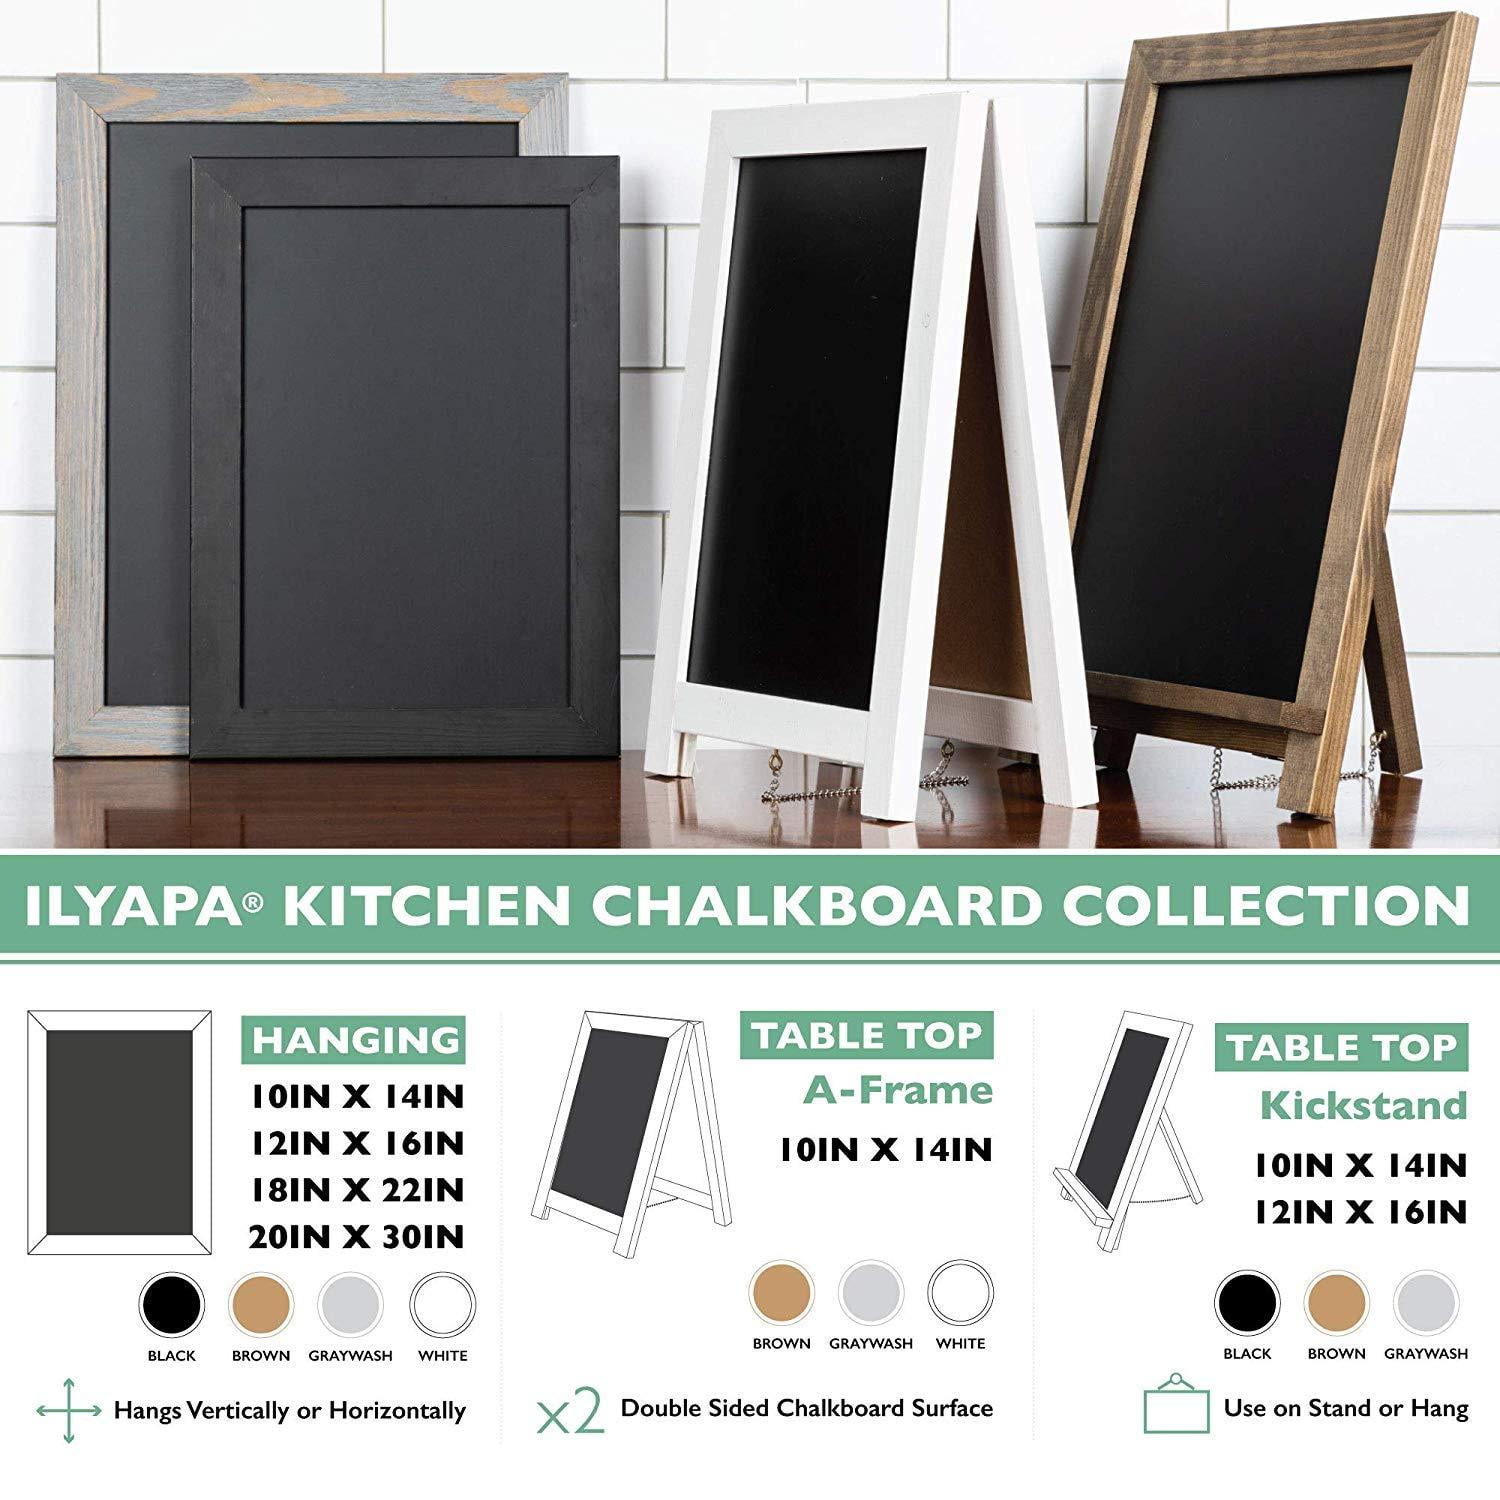 Rustic WhiteTabletop Chalk Board Unique Iron Scroll Legs & Wall Mount Option 